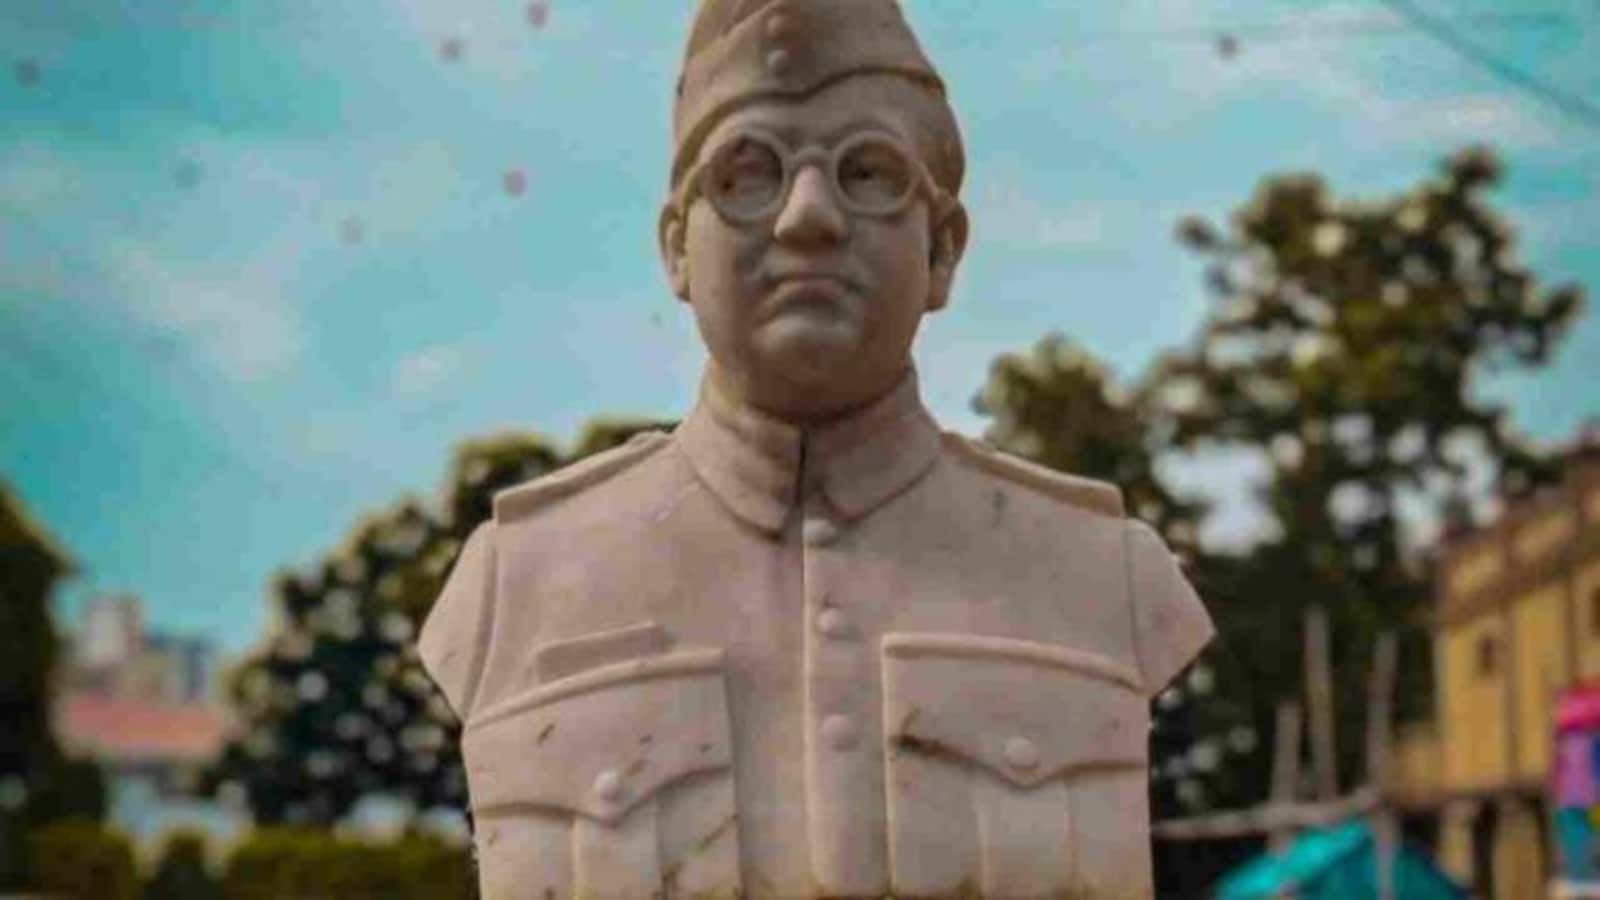 Netaji daughter to miss unveiling of father's statue, wants Govt to  consider bringing Subhas Bose's remains back